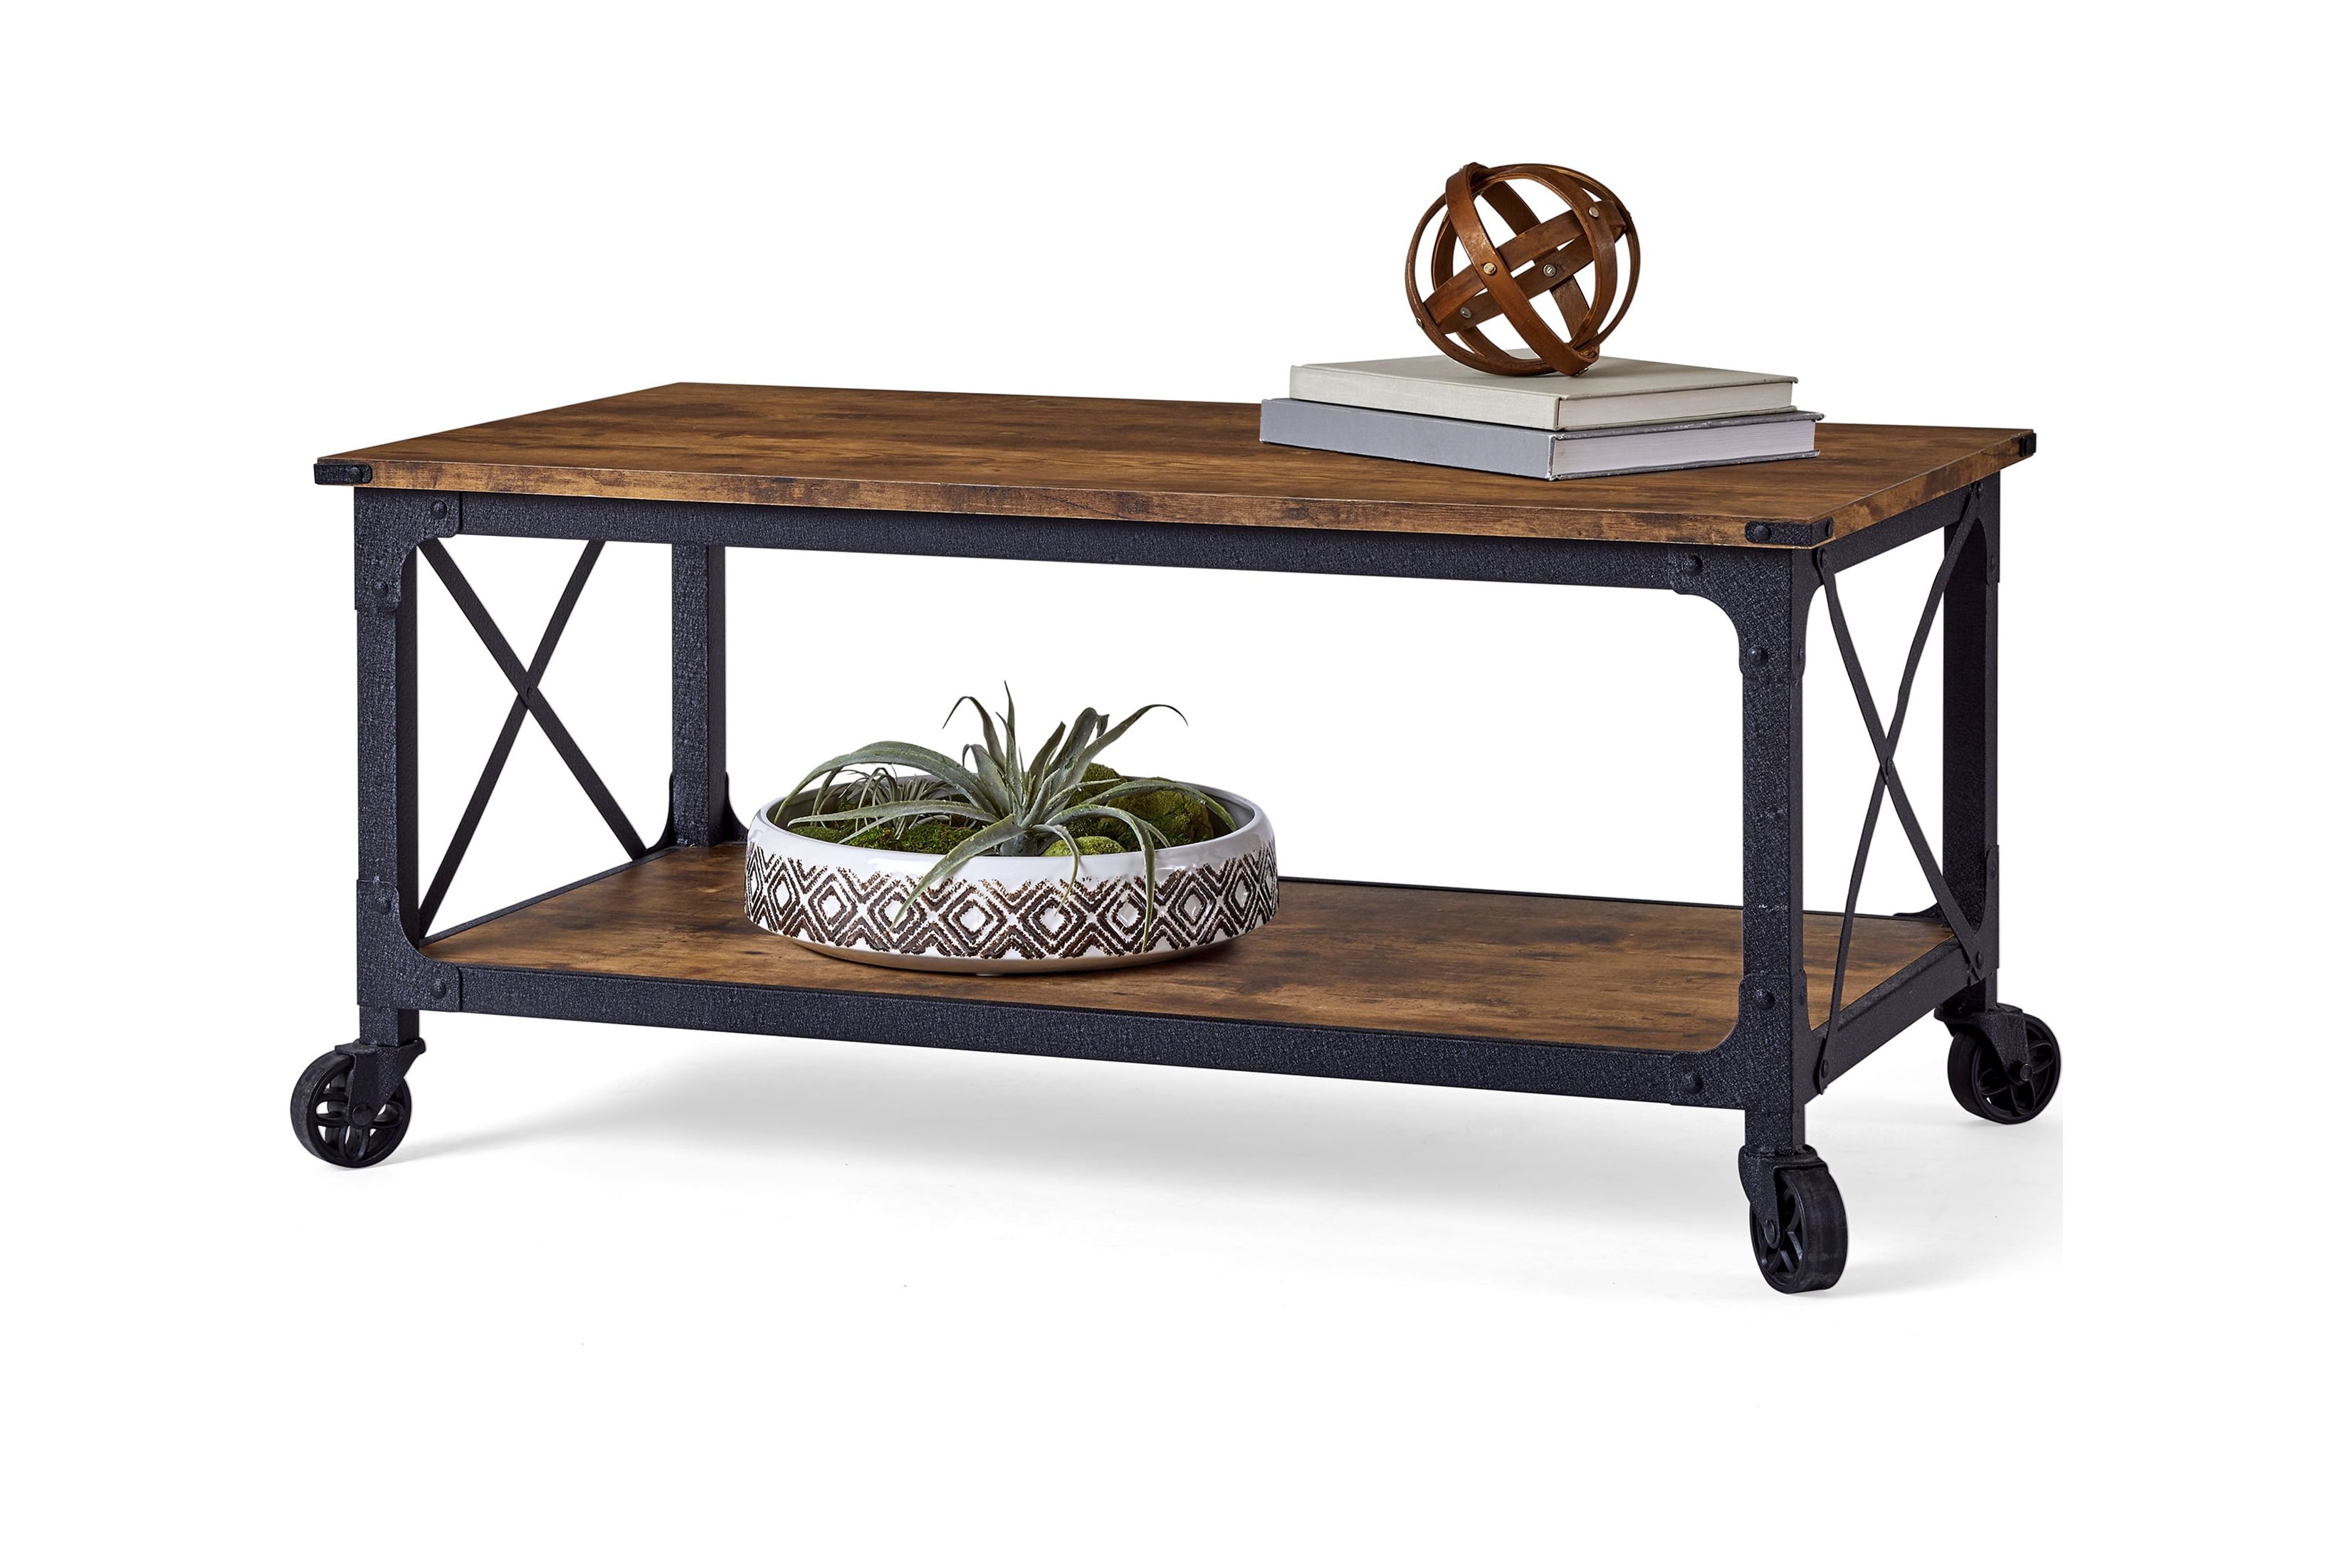 Better Homes & Gardens Rustic Country Coffee Table, Weathered Pine Finish - image 5 of 8